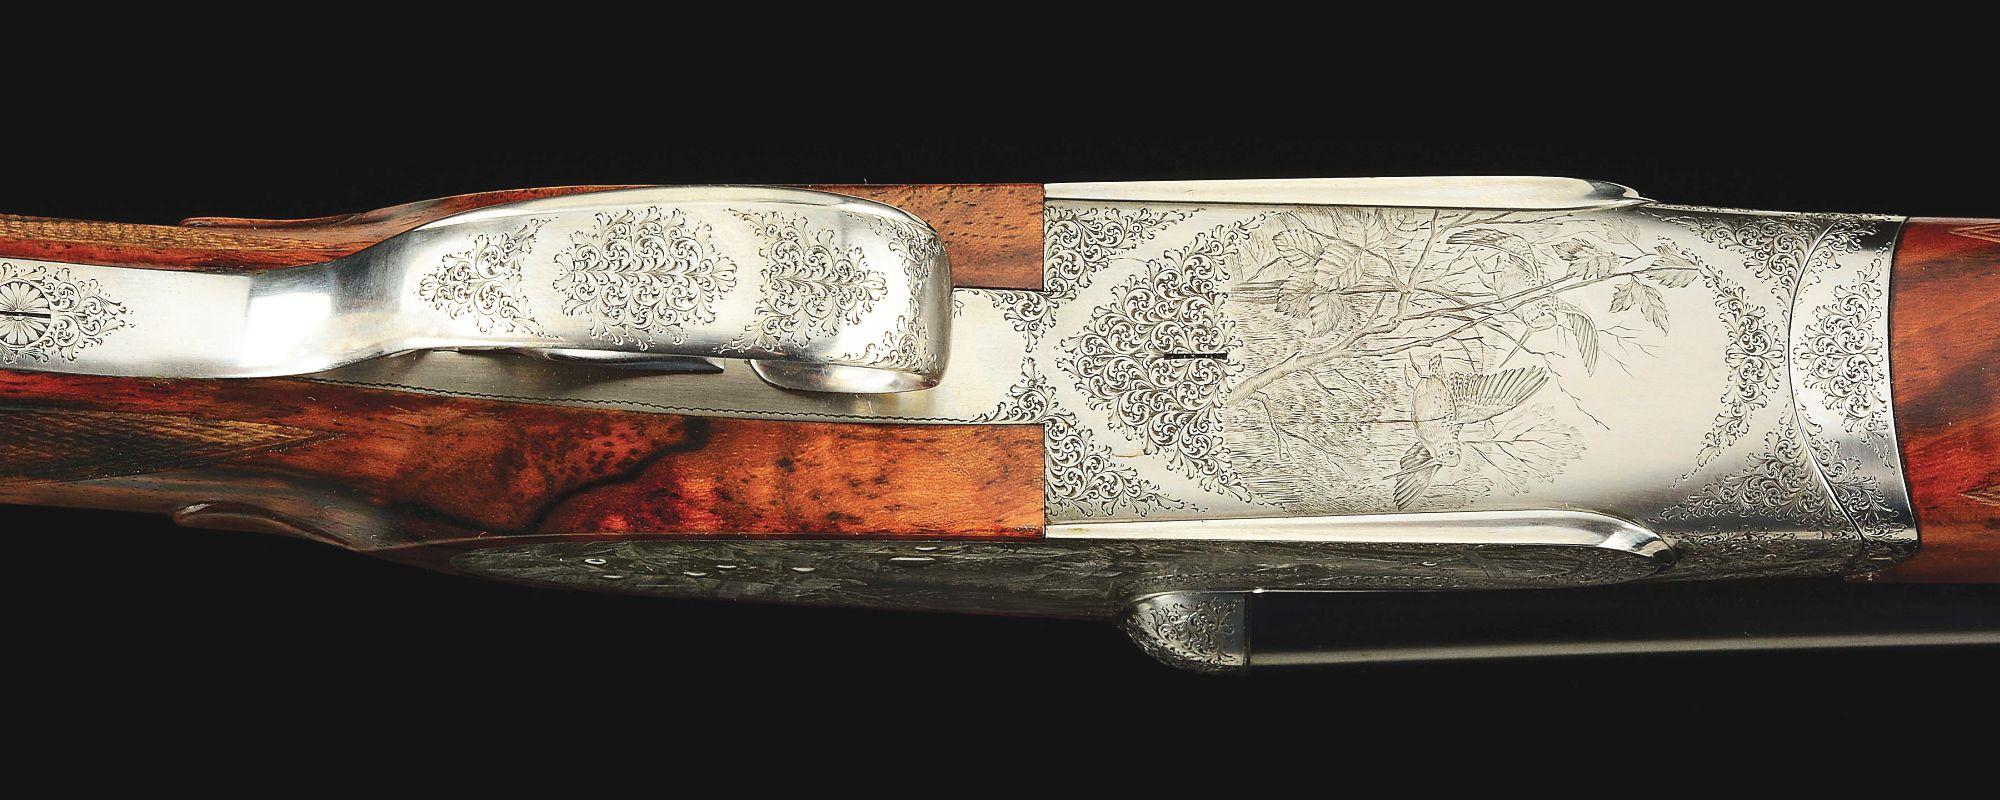 (M) 20 BORE ABBIATICO AND SALVINELLI SIDE BY SIDE SHOTGUN WITH FINE GAME SCENE ENGRAVING BY F.  GALE